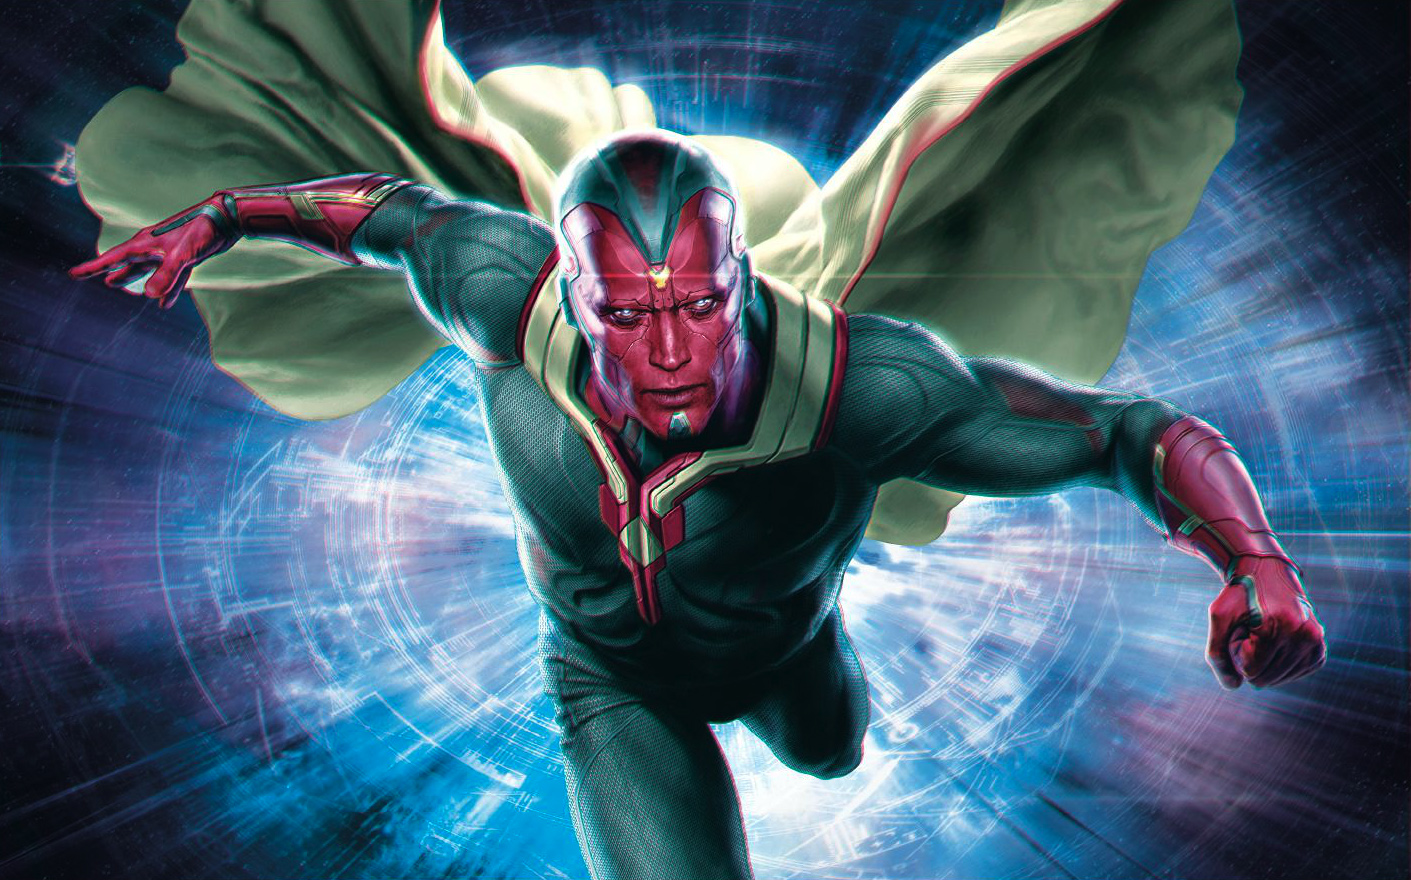 age-of-ultron-vision-hd.jpg